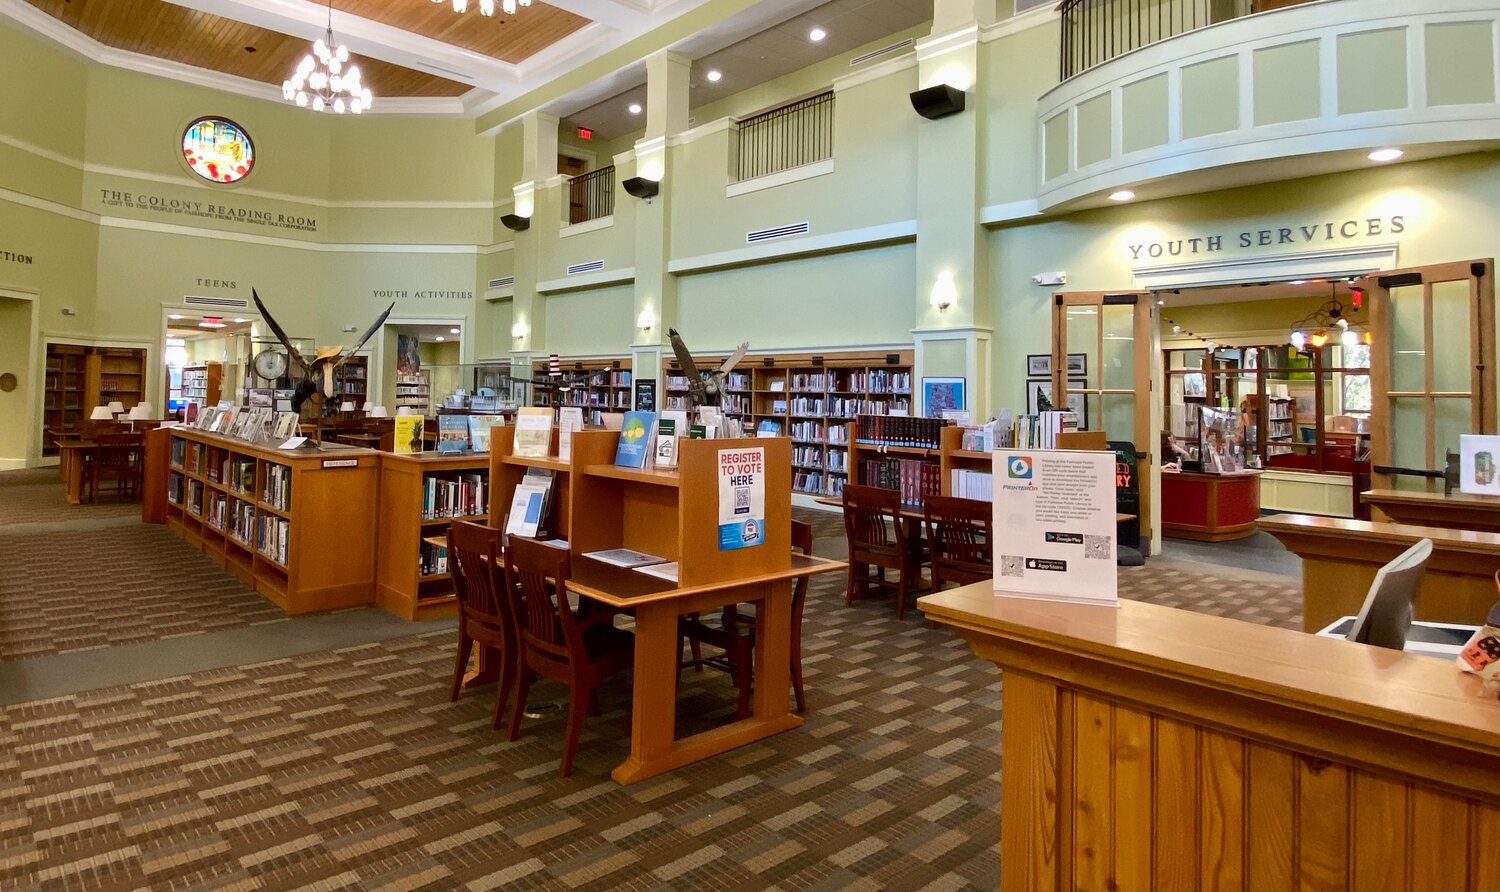 The main hall at the Fairhope Public Library. The Youth Library entrance is pictures on the right and the entrance to the Teen Library is at the far end under the stained glass window.